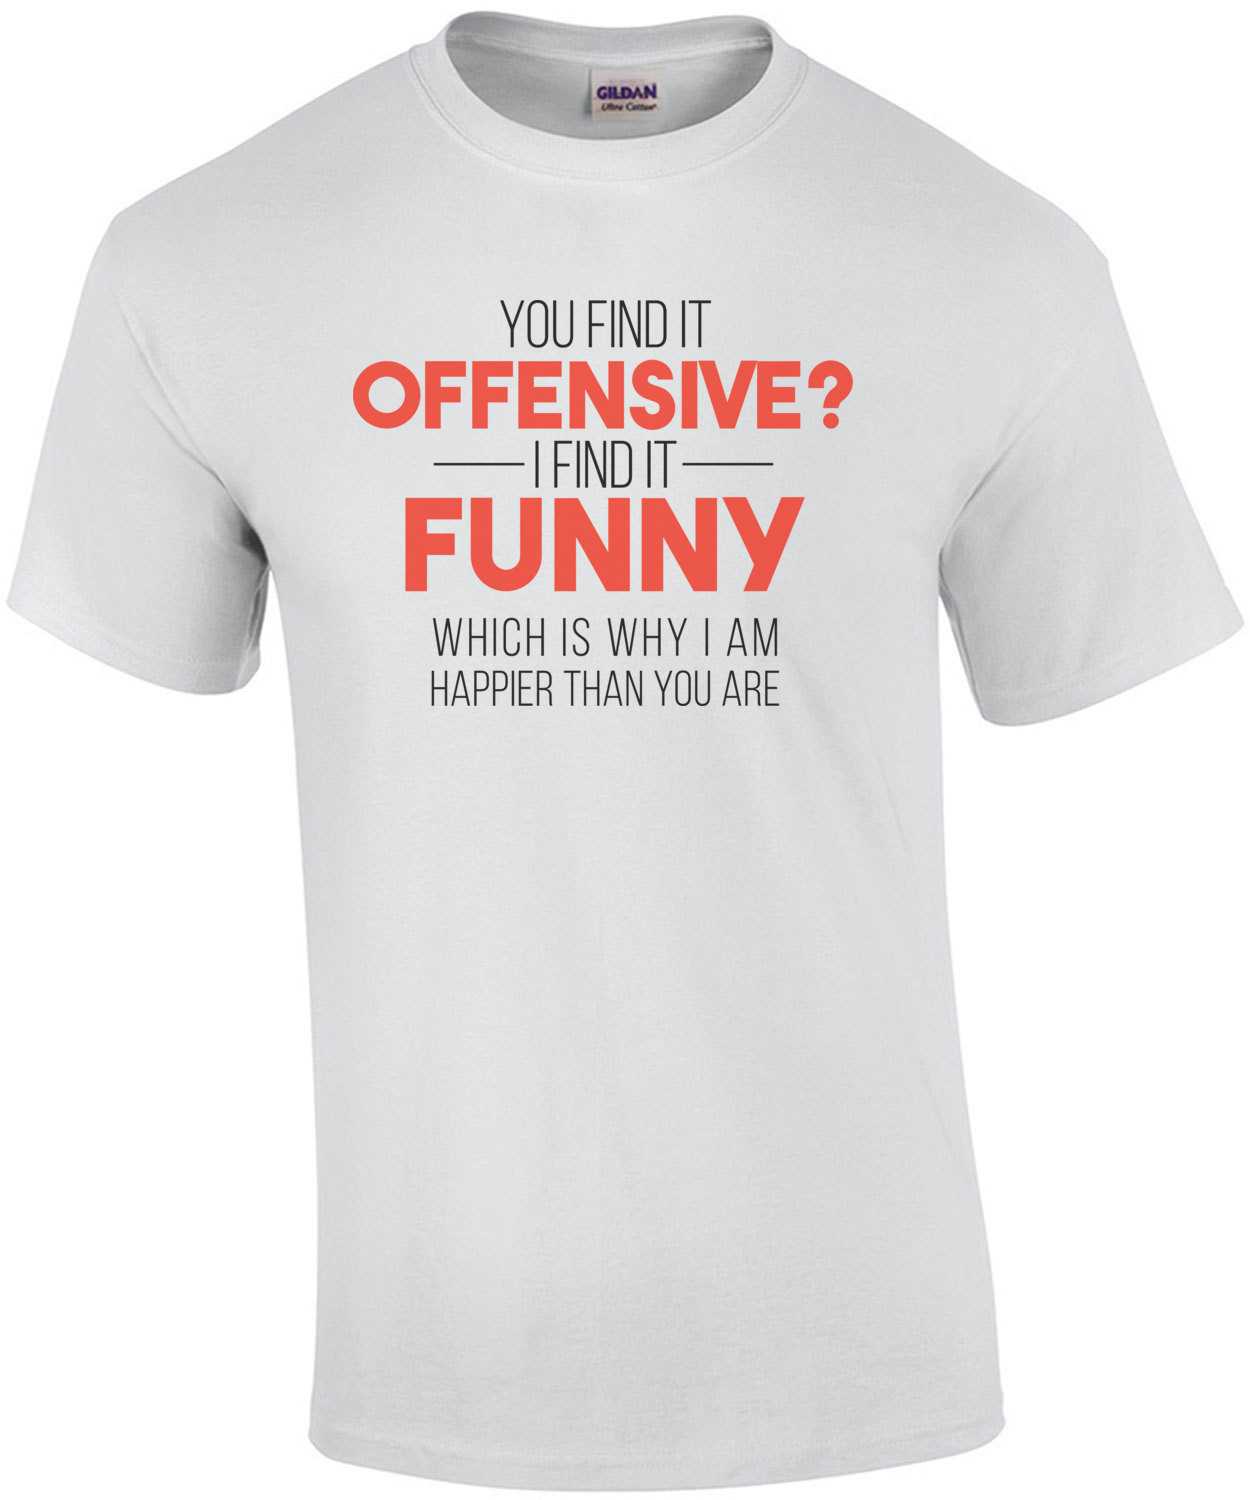   YOU FIND IT OFFENSIVE? I FIND IT FUNNY. THAT'S WHY I'M HAPPIER THAN YOU. Shirt